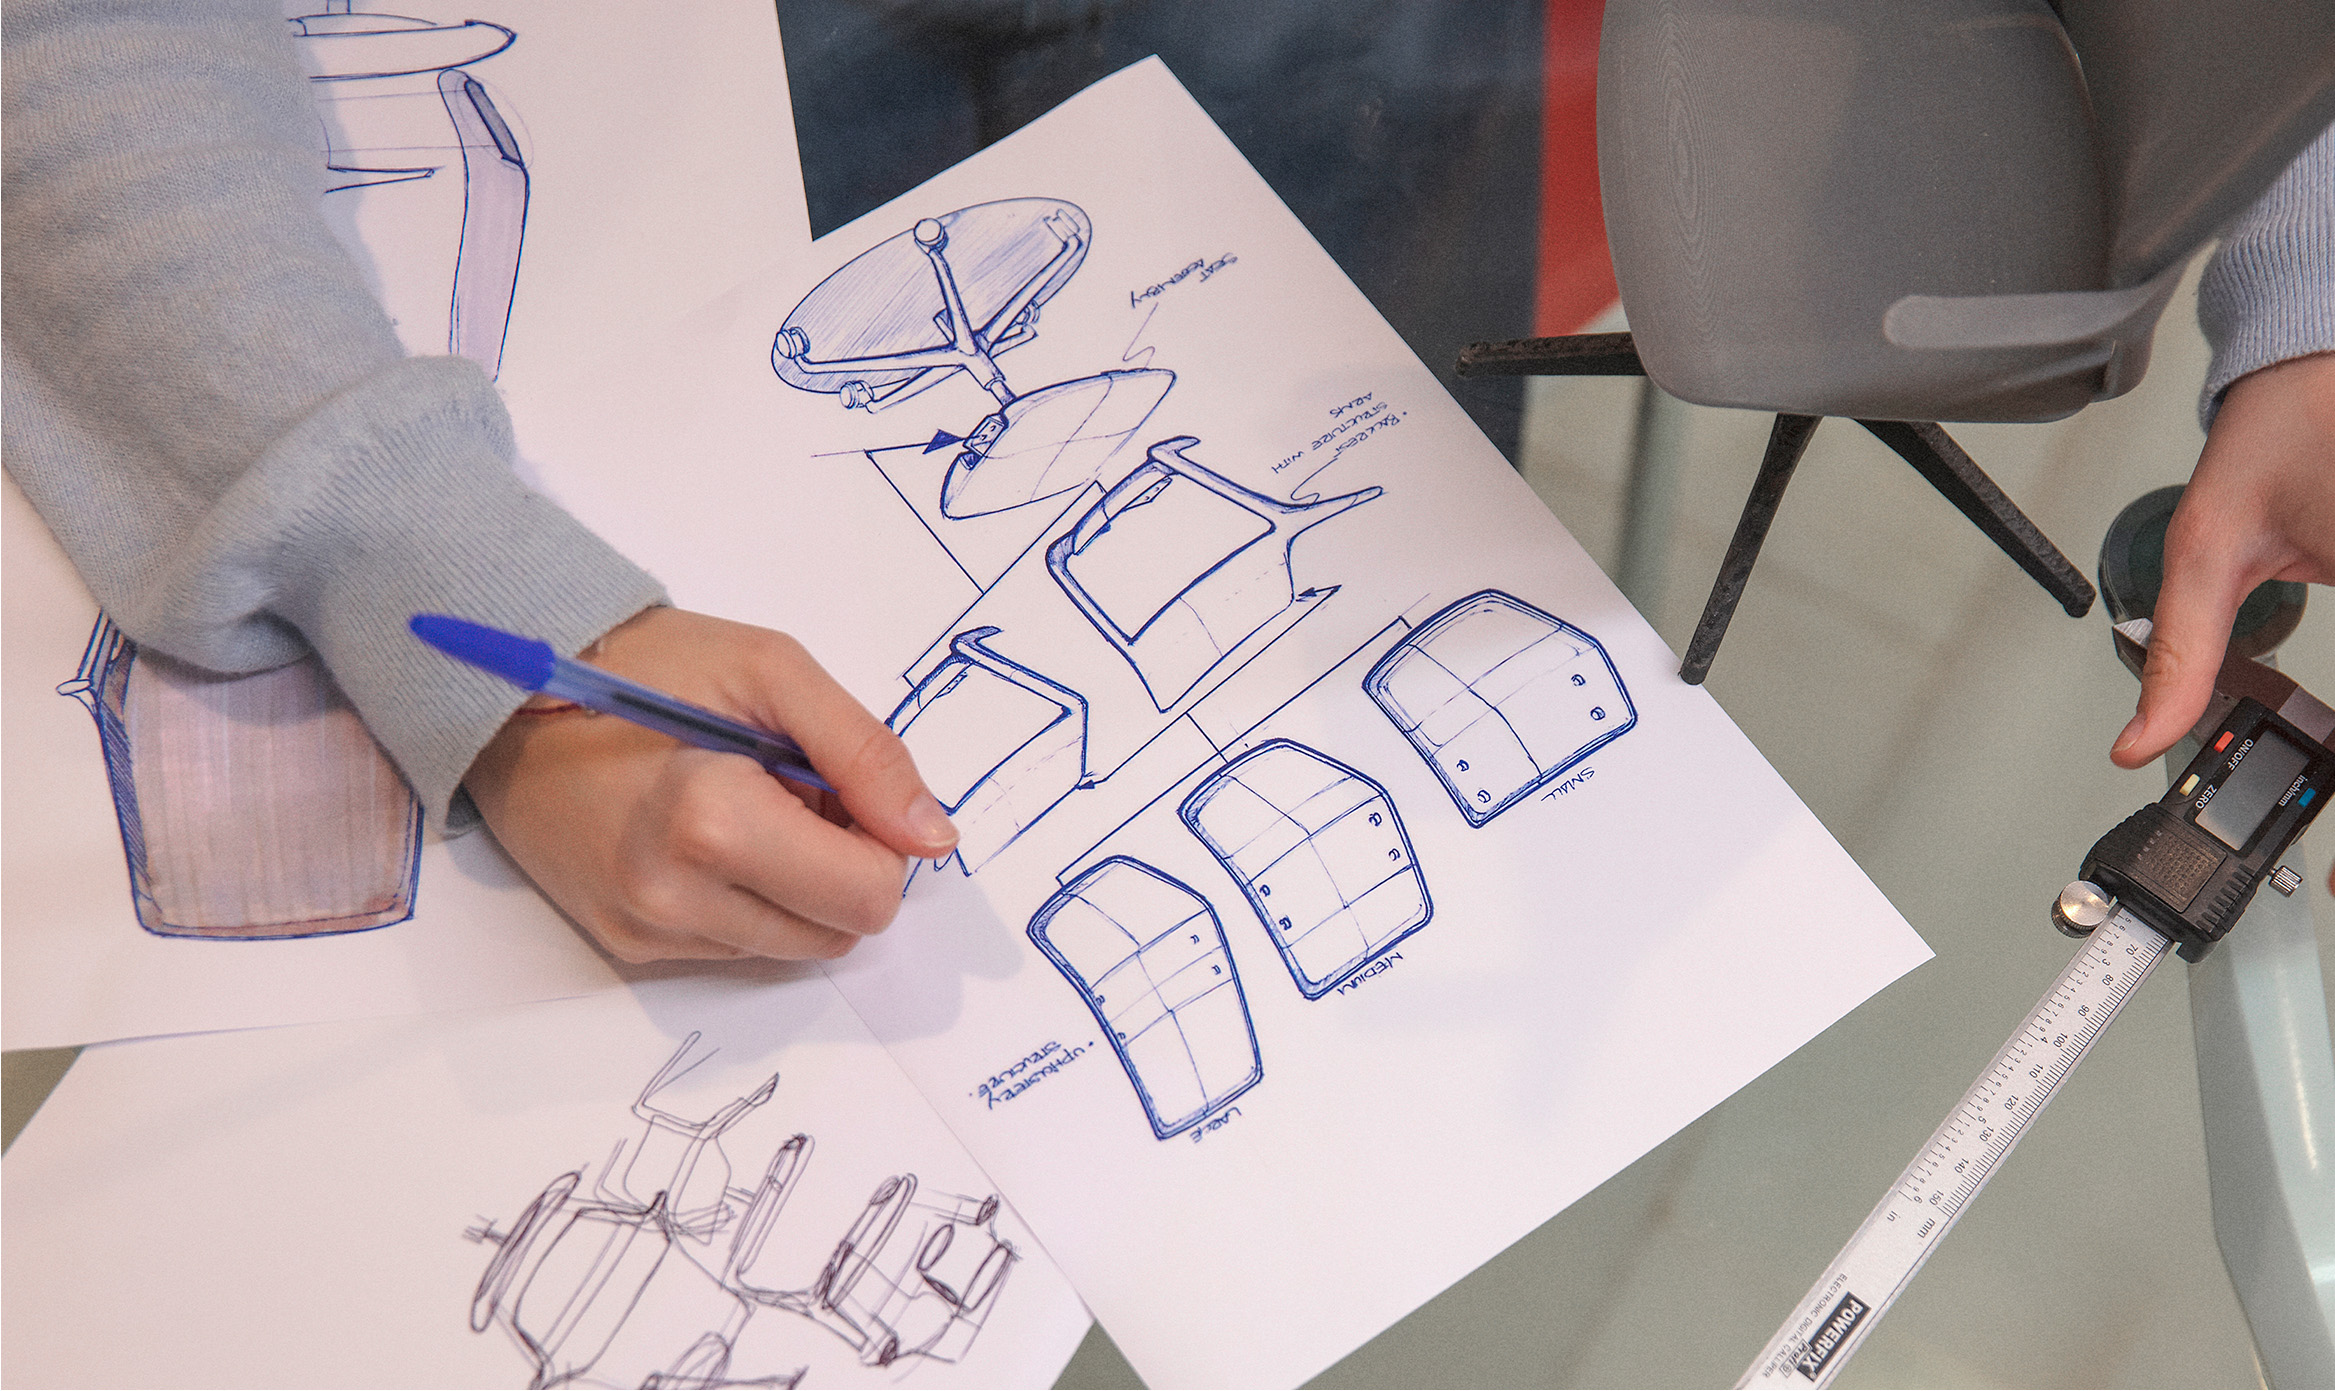 Sketches of the OFY chair by Alegre Design, showcasing the creative design process for Narbutas. These sketches highlight the innovative approach and ergonomic features developed by the professional design studio.